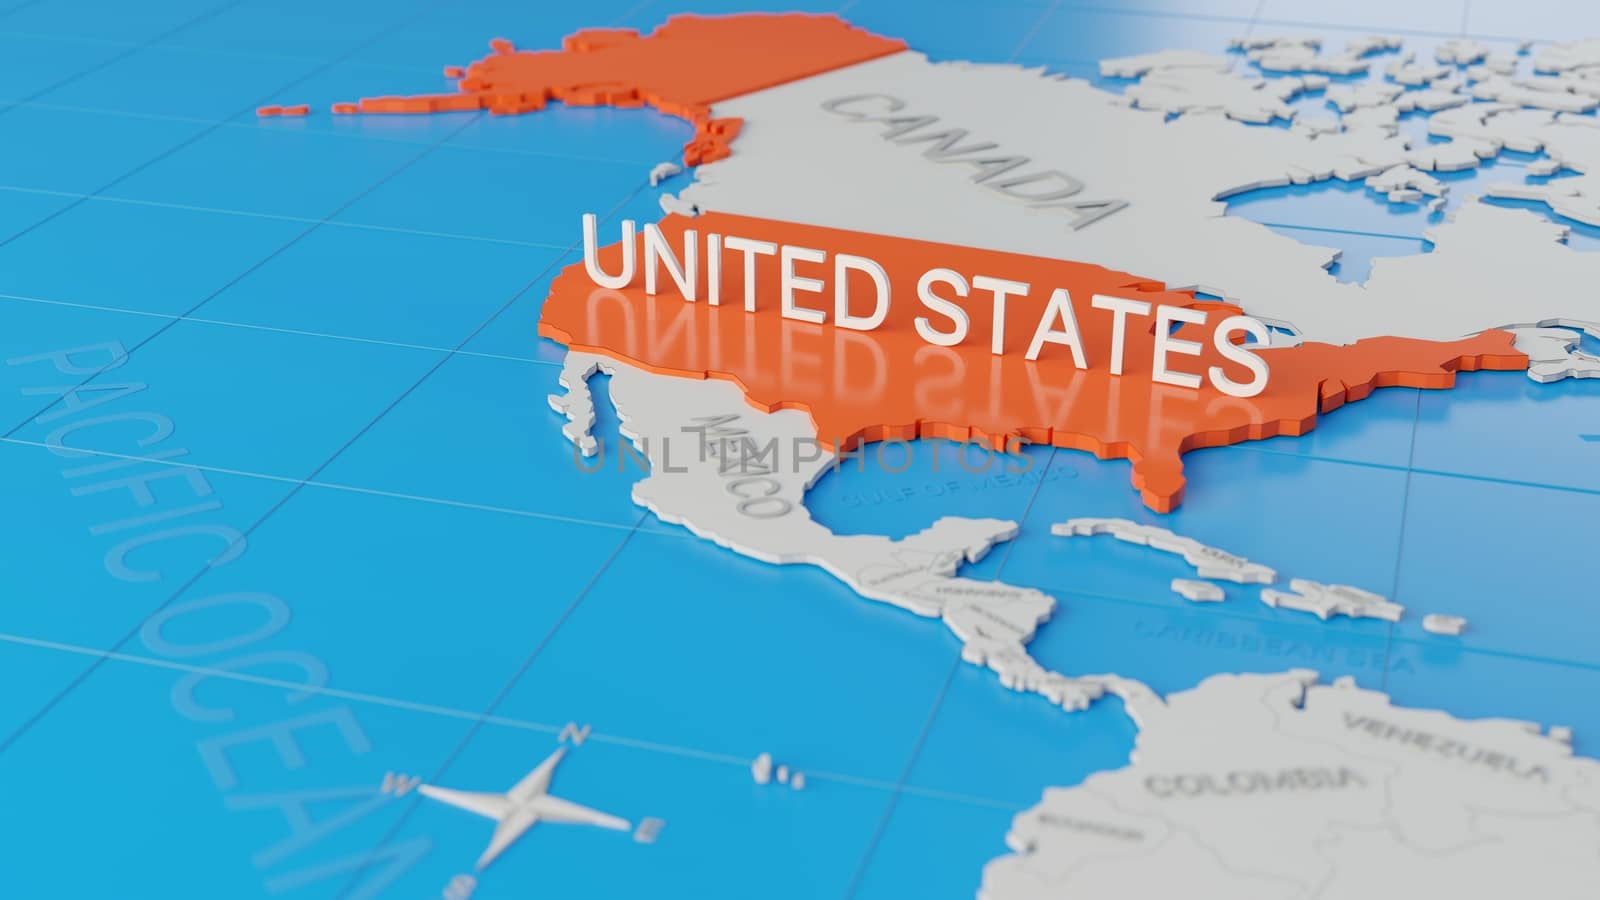 United States highlighted on a white simplified 3D world map. Digital 3D render.